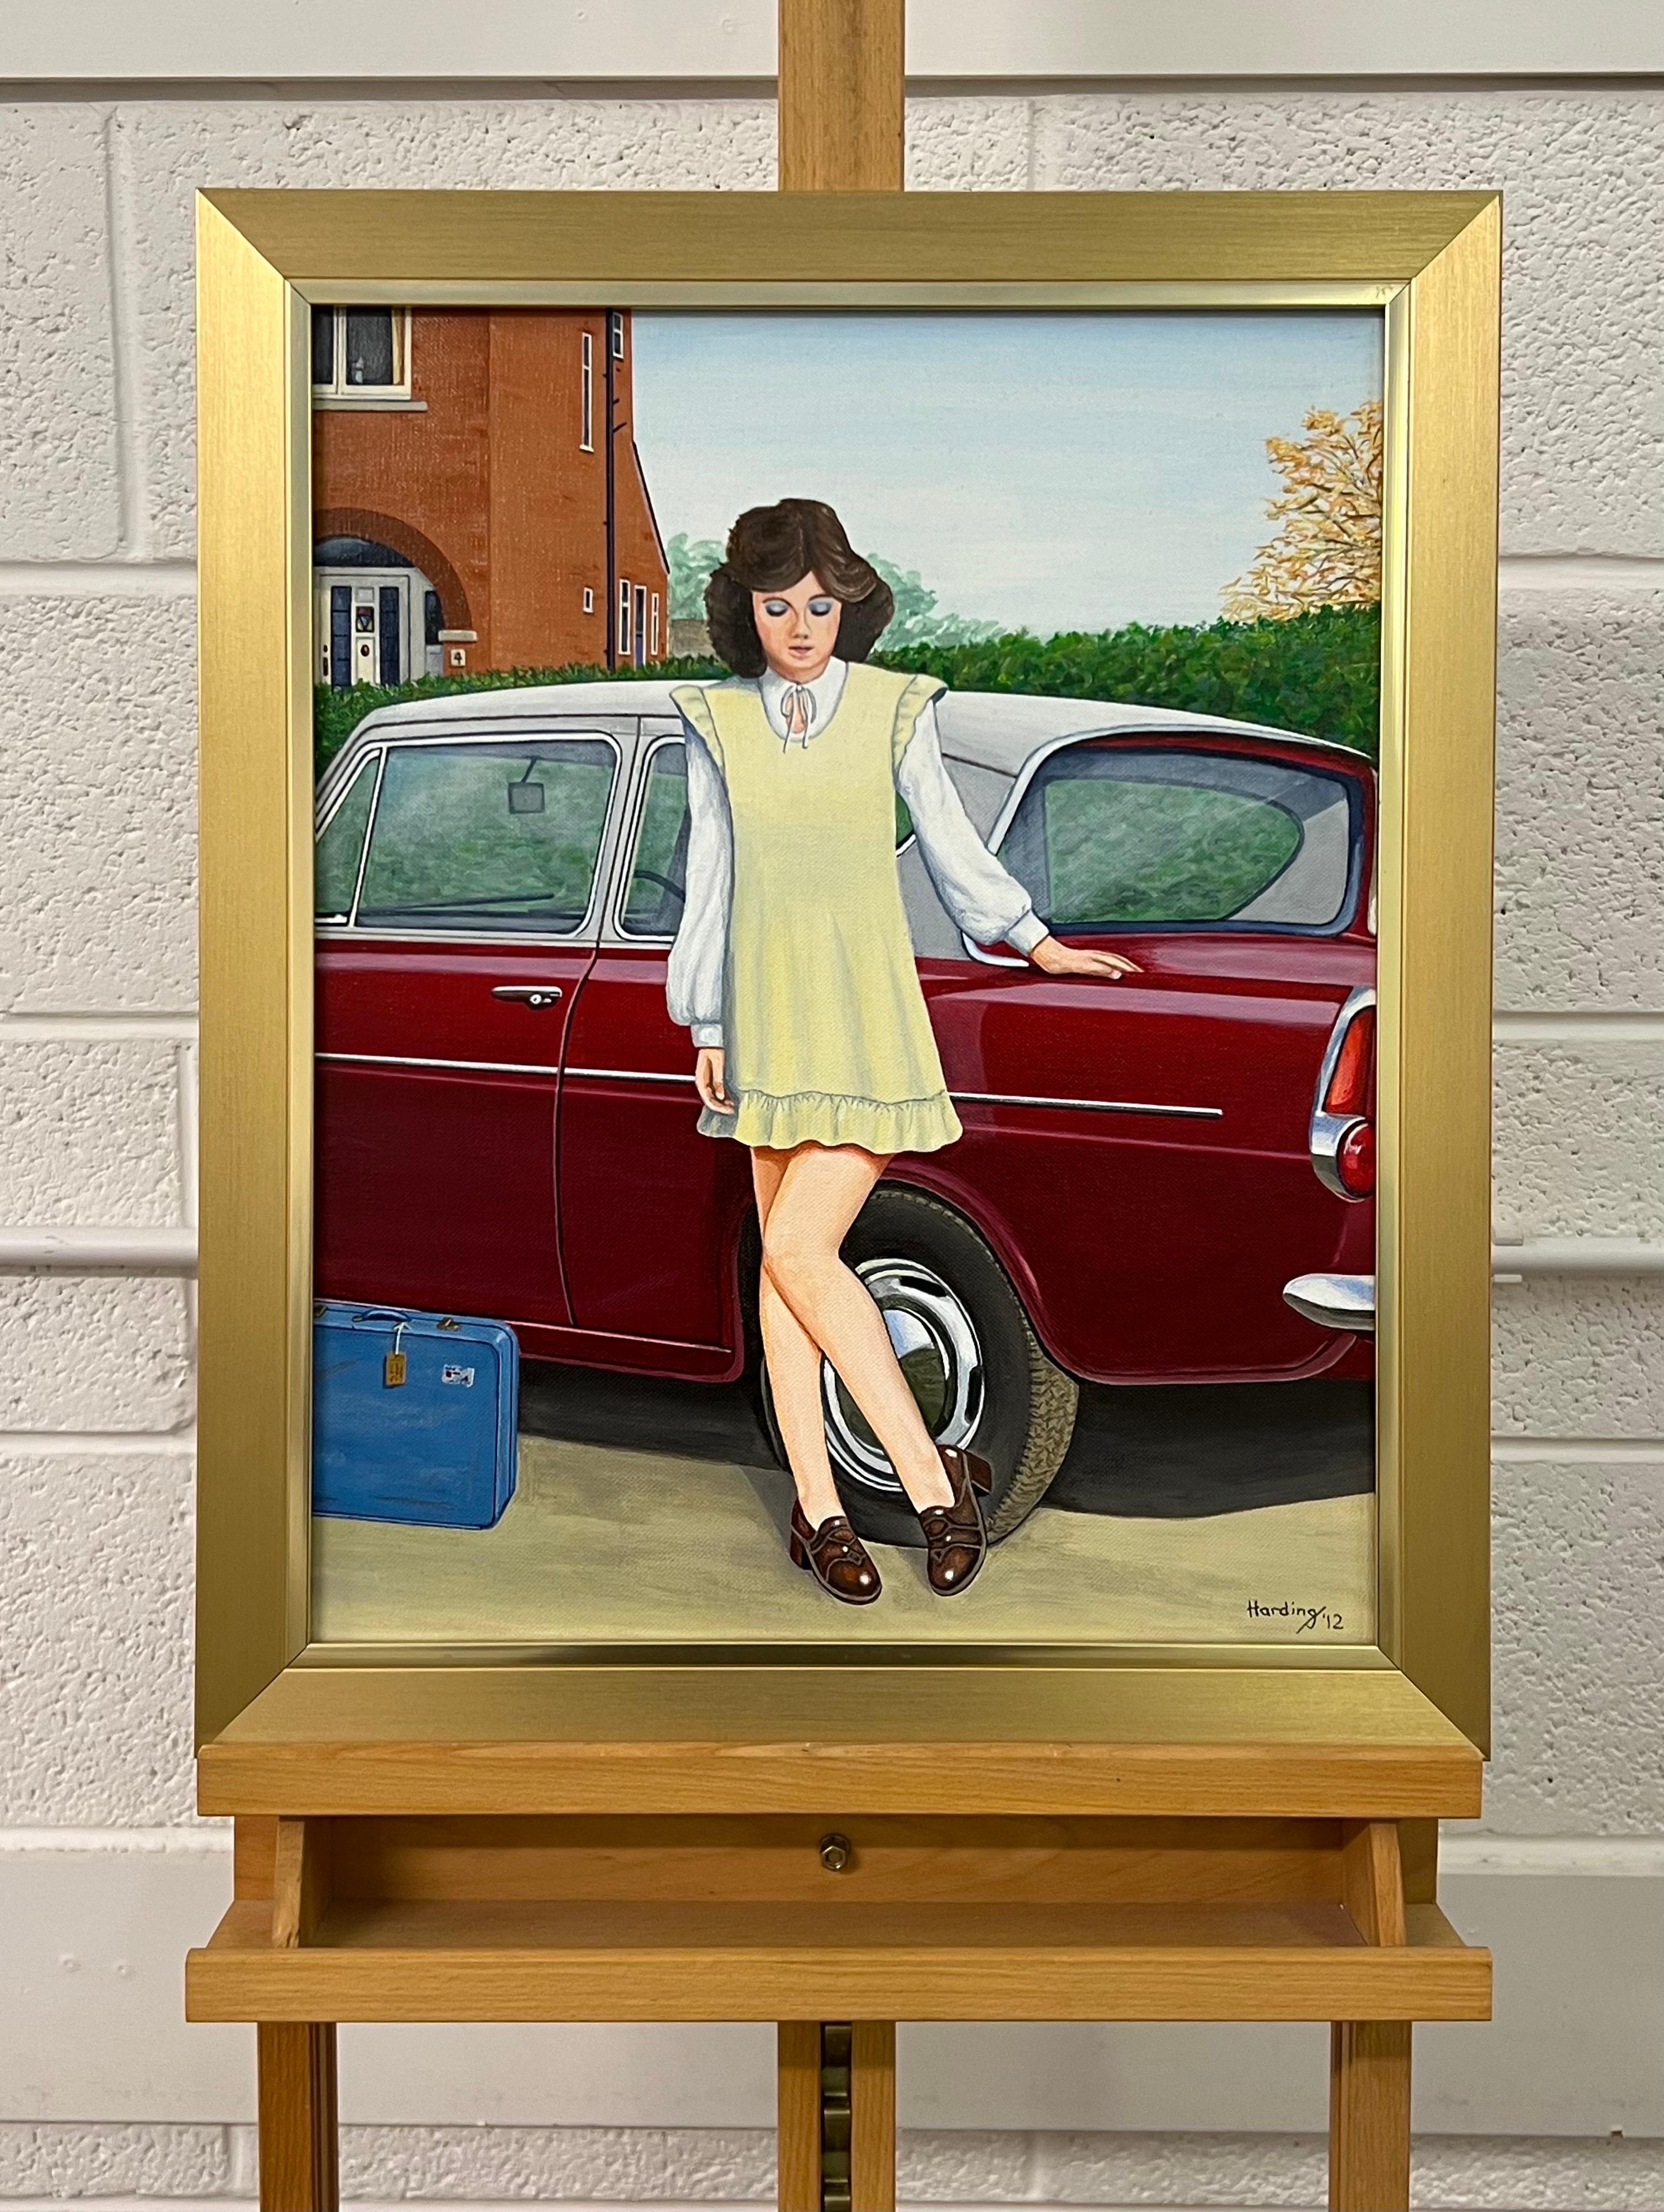 Vintage English Woman in Suburbia with Classic Ford Car 1960's 1970's England  - English School Painting by Paul F Harding